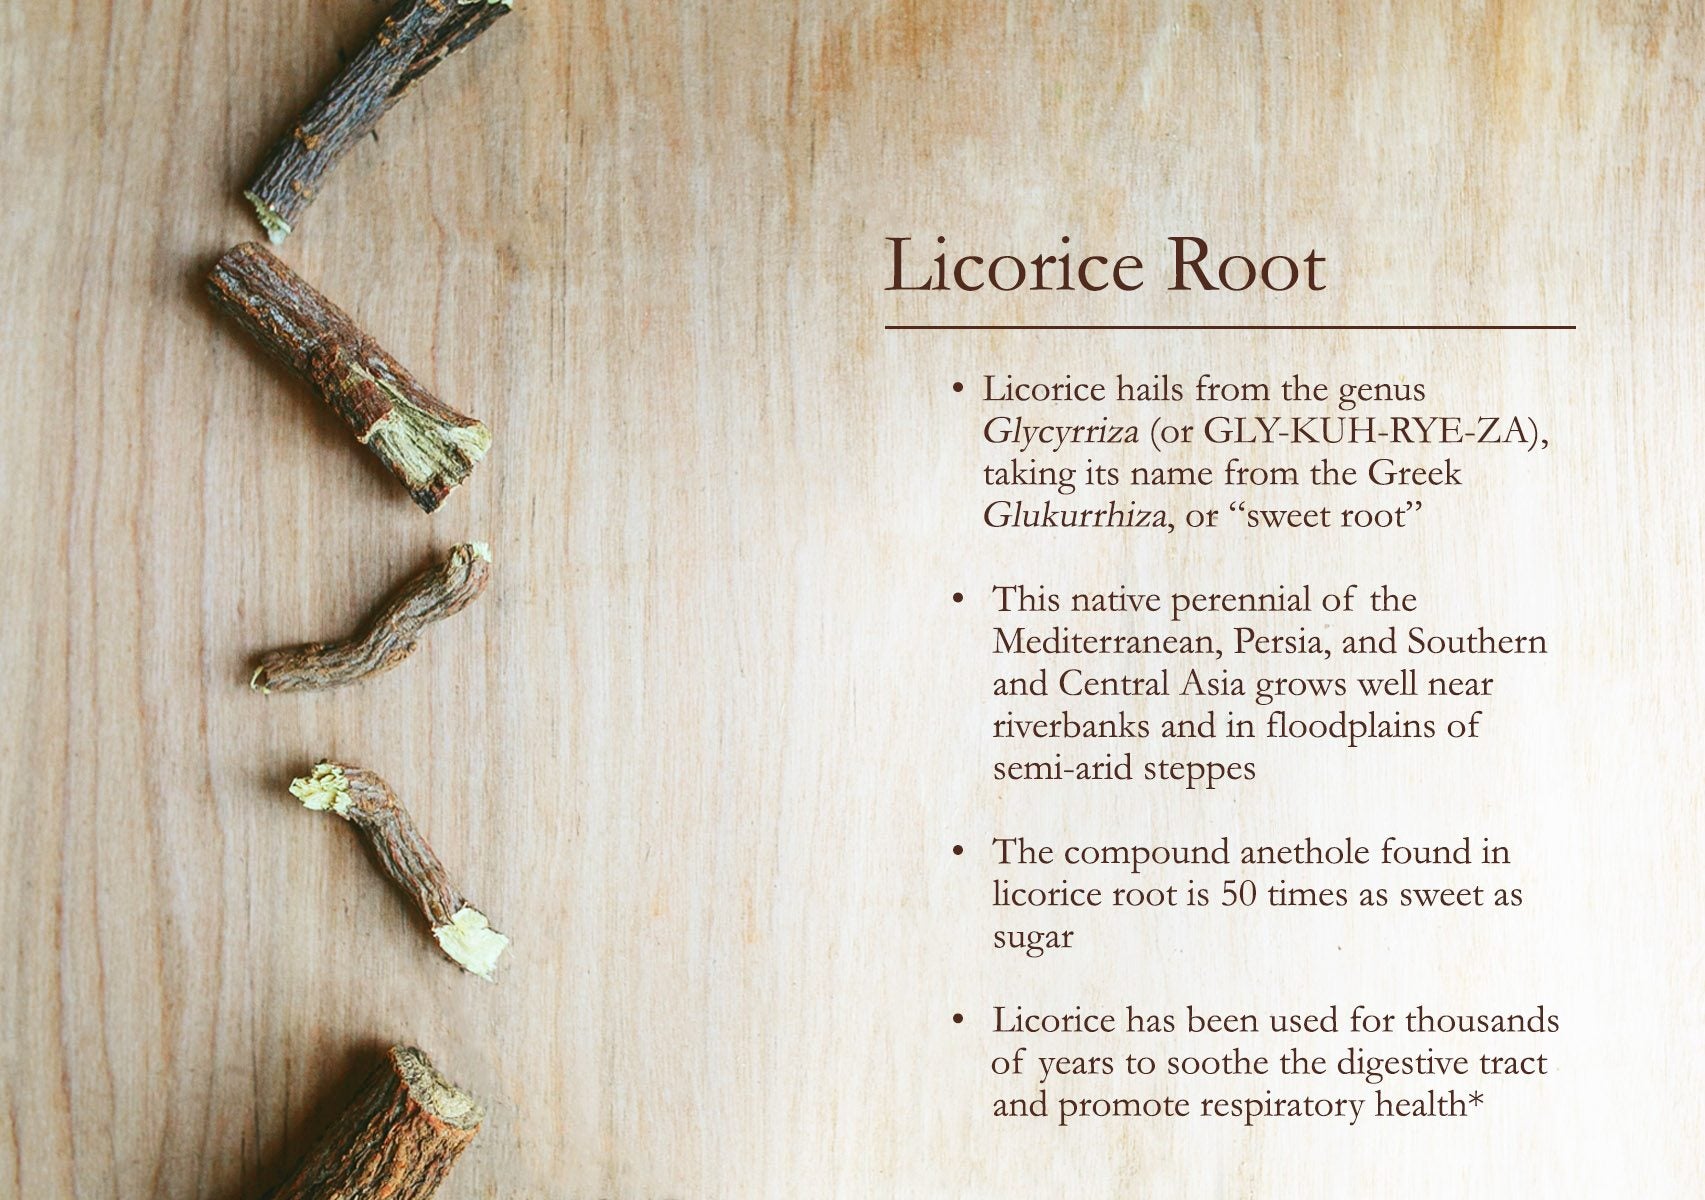  licorice root facts